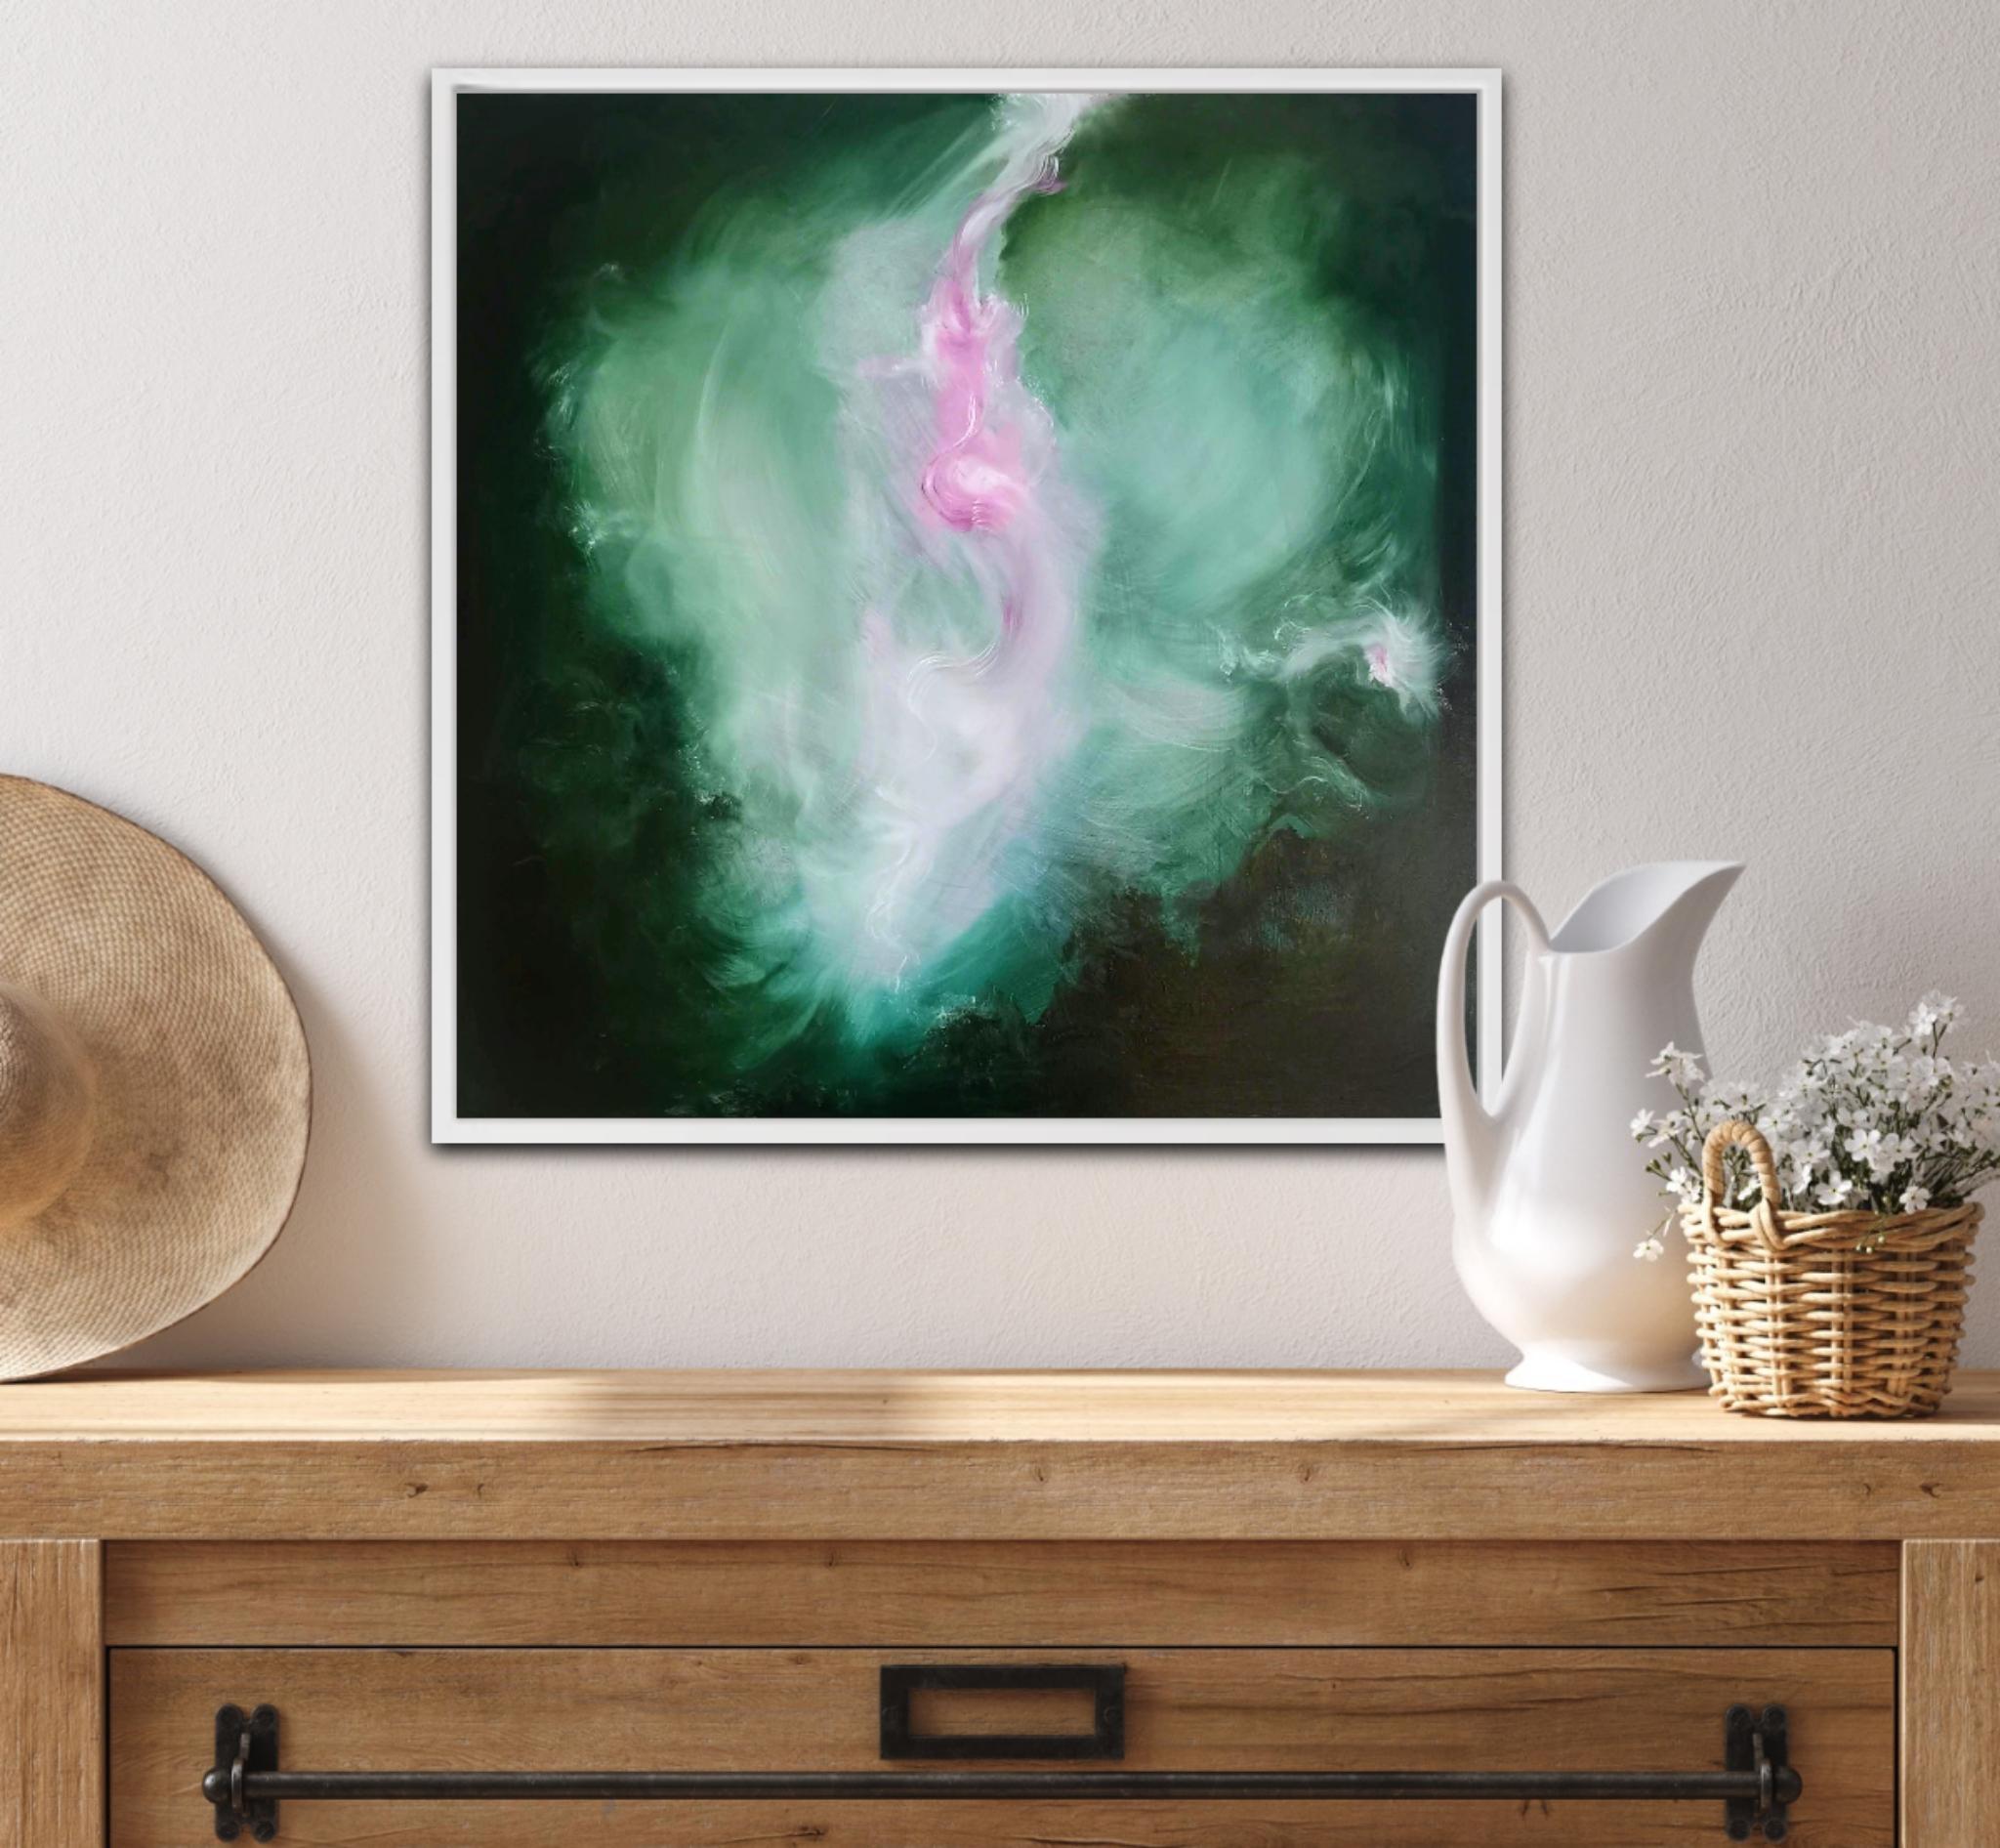 The Believer - Abstract floral painting in green and pink - Painting by Jennifer L. Baker